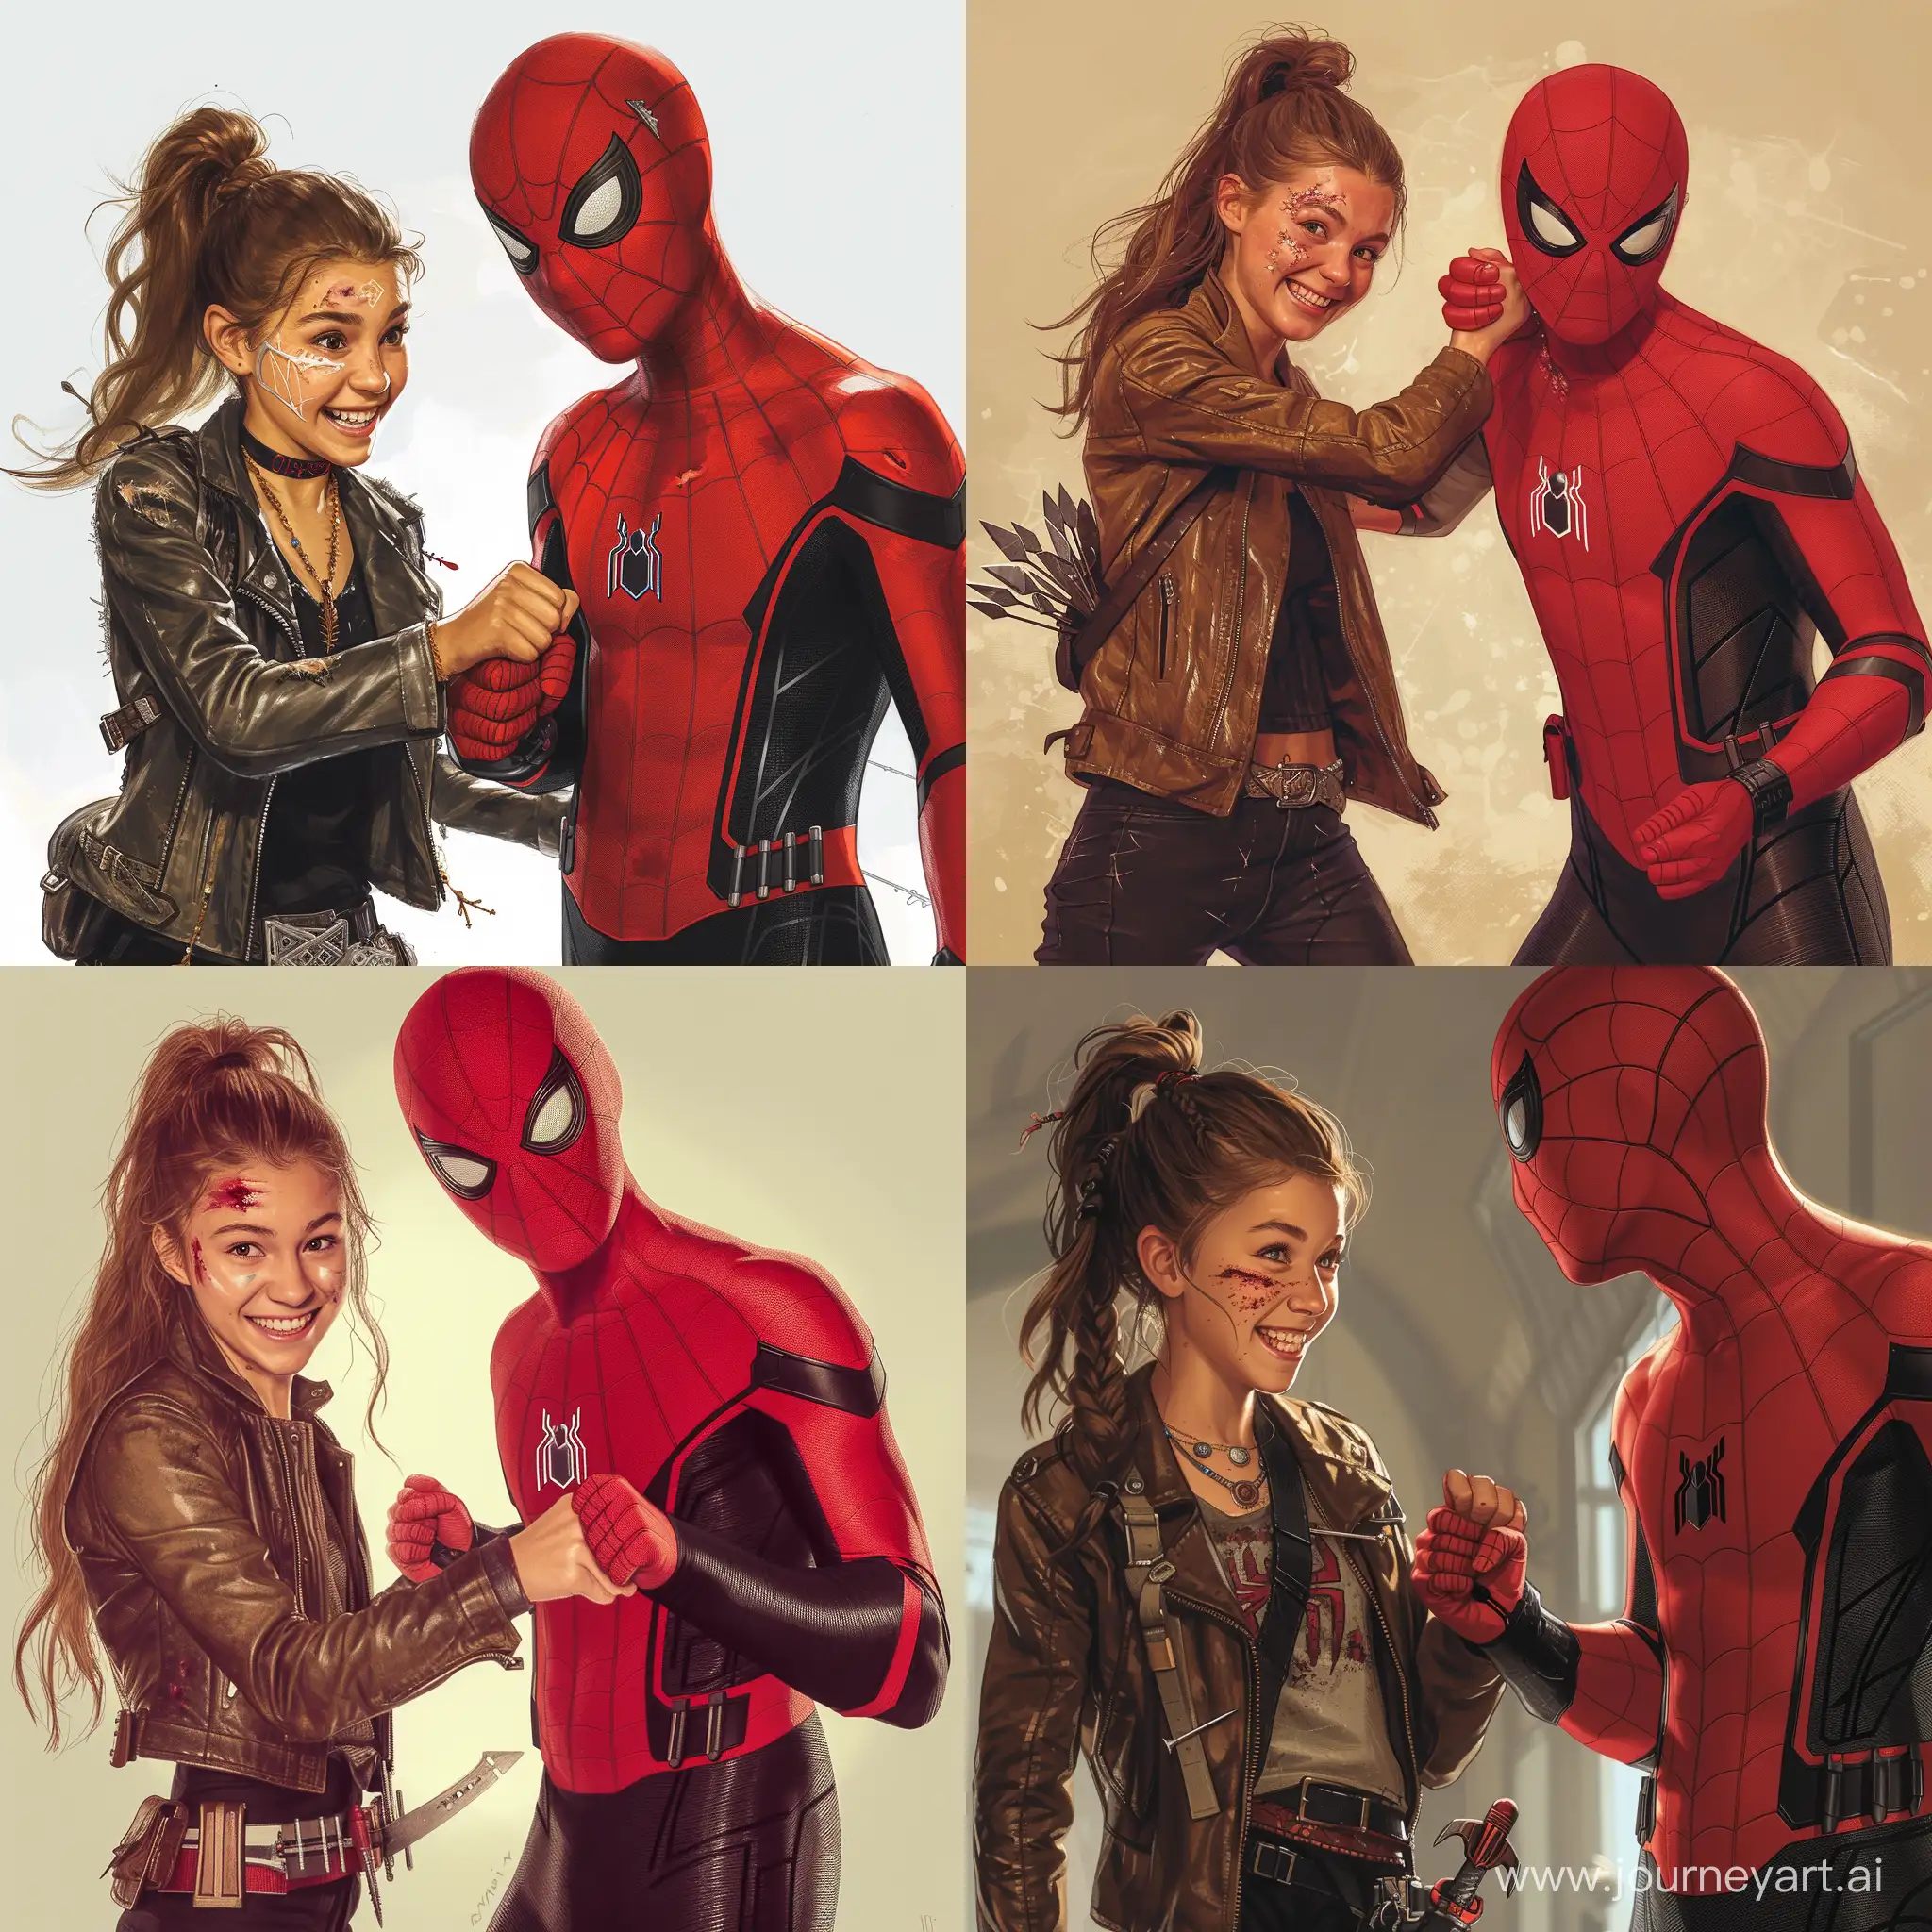 17 year old girl, brown hair in a ponytail, brown eyes, smirking, small cut on her face, leather jacket, black pants, fancy throwing knives on a belt at her hip, she is by spider man, spider man has on his spider suit, with his mask off, spider man has a small cut on his face, spider man is smiling, they are fist bumping